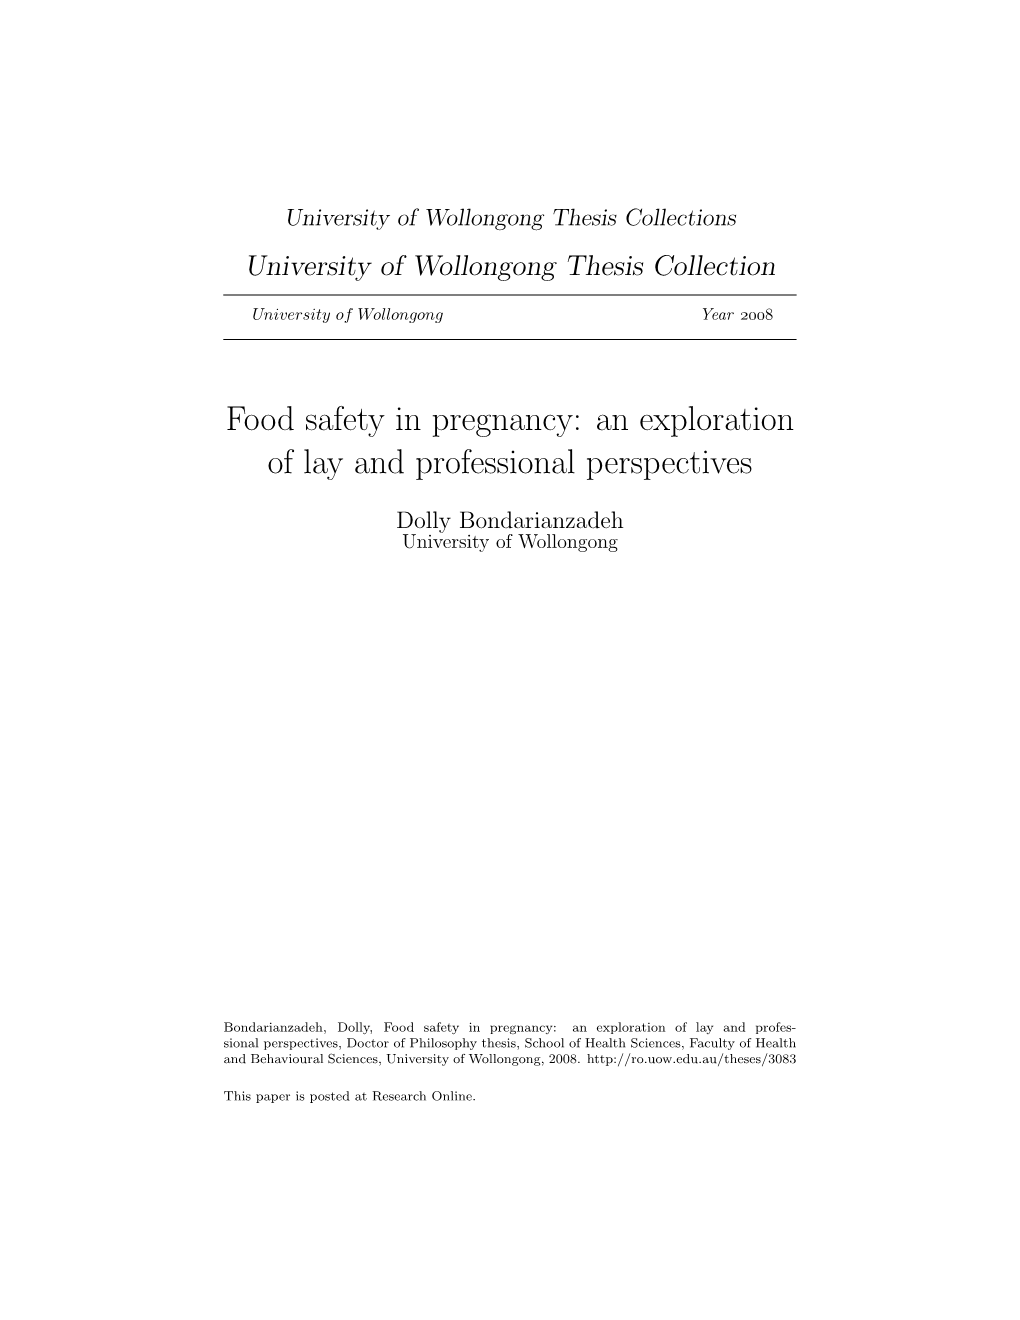 Food Safety in Pregnancy: an Exploration of Lay and Professional Perspectives